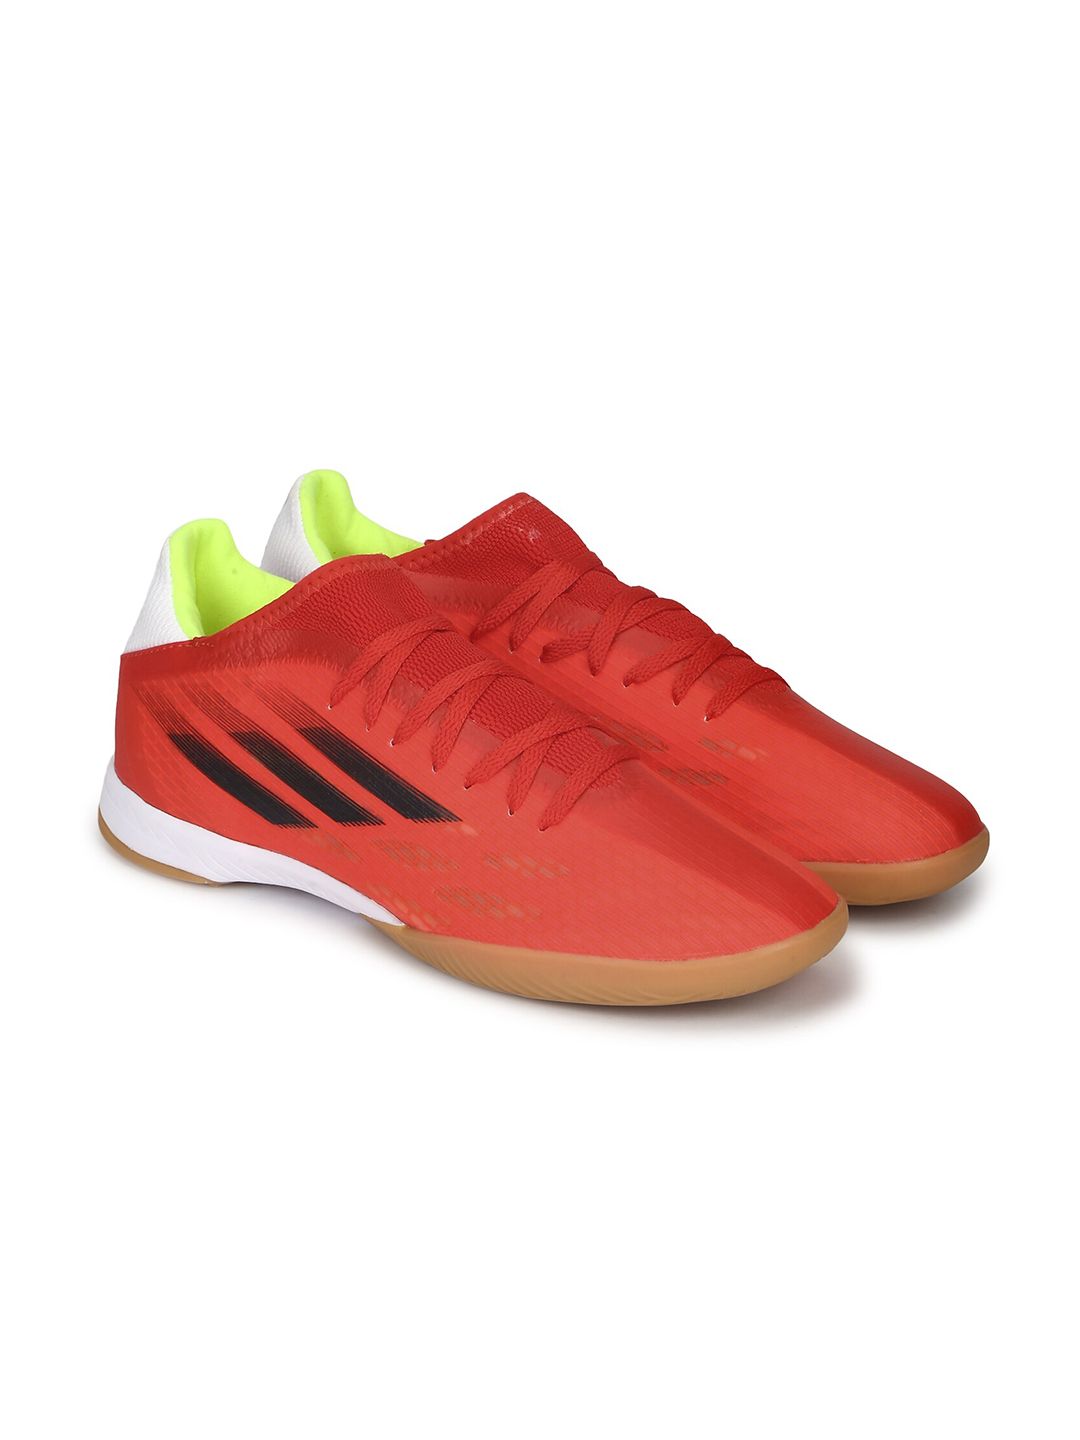 ADIDAS Unisex Red Sports Shoes Price in India